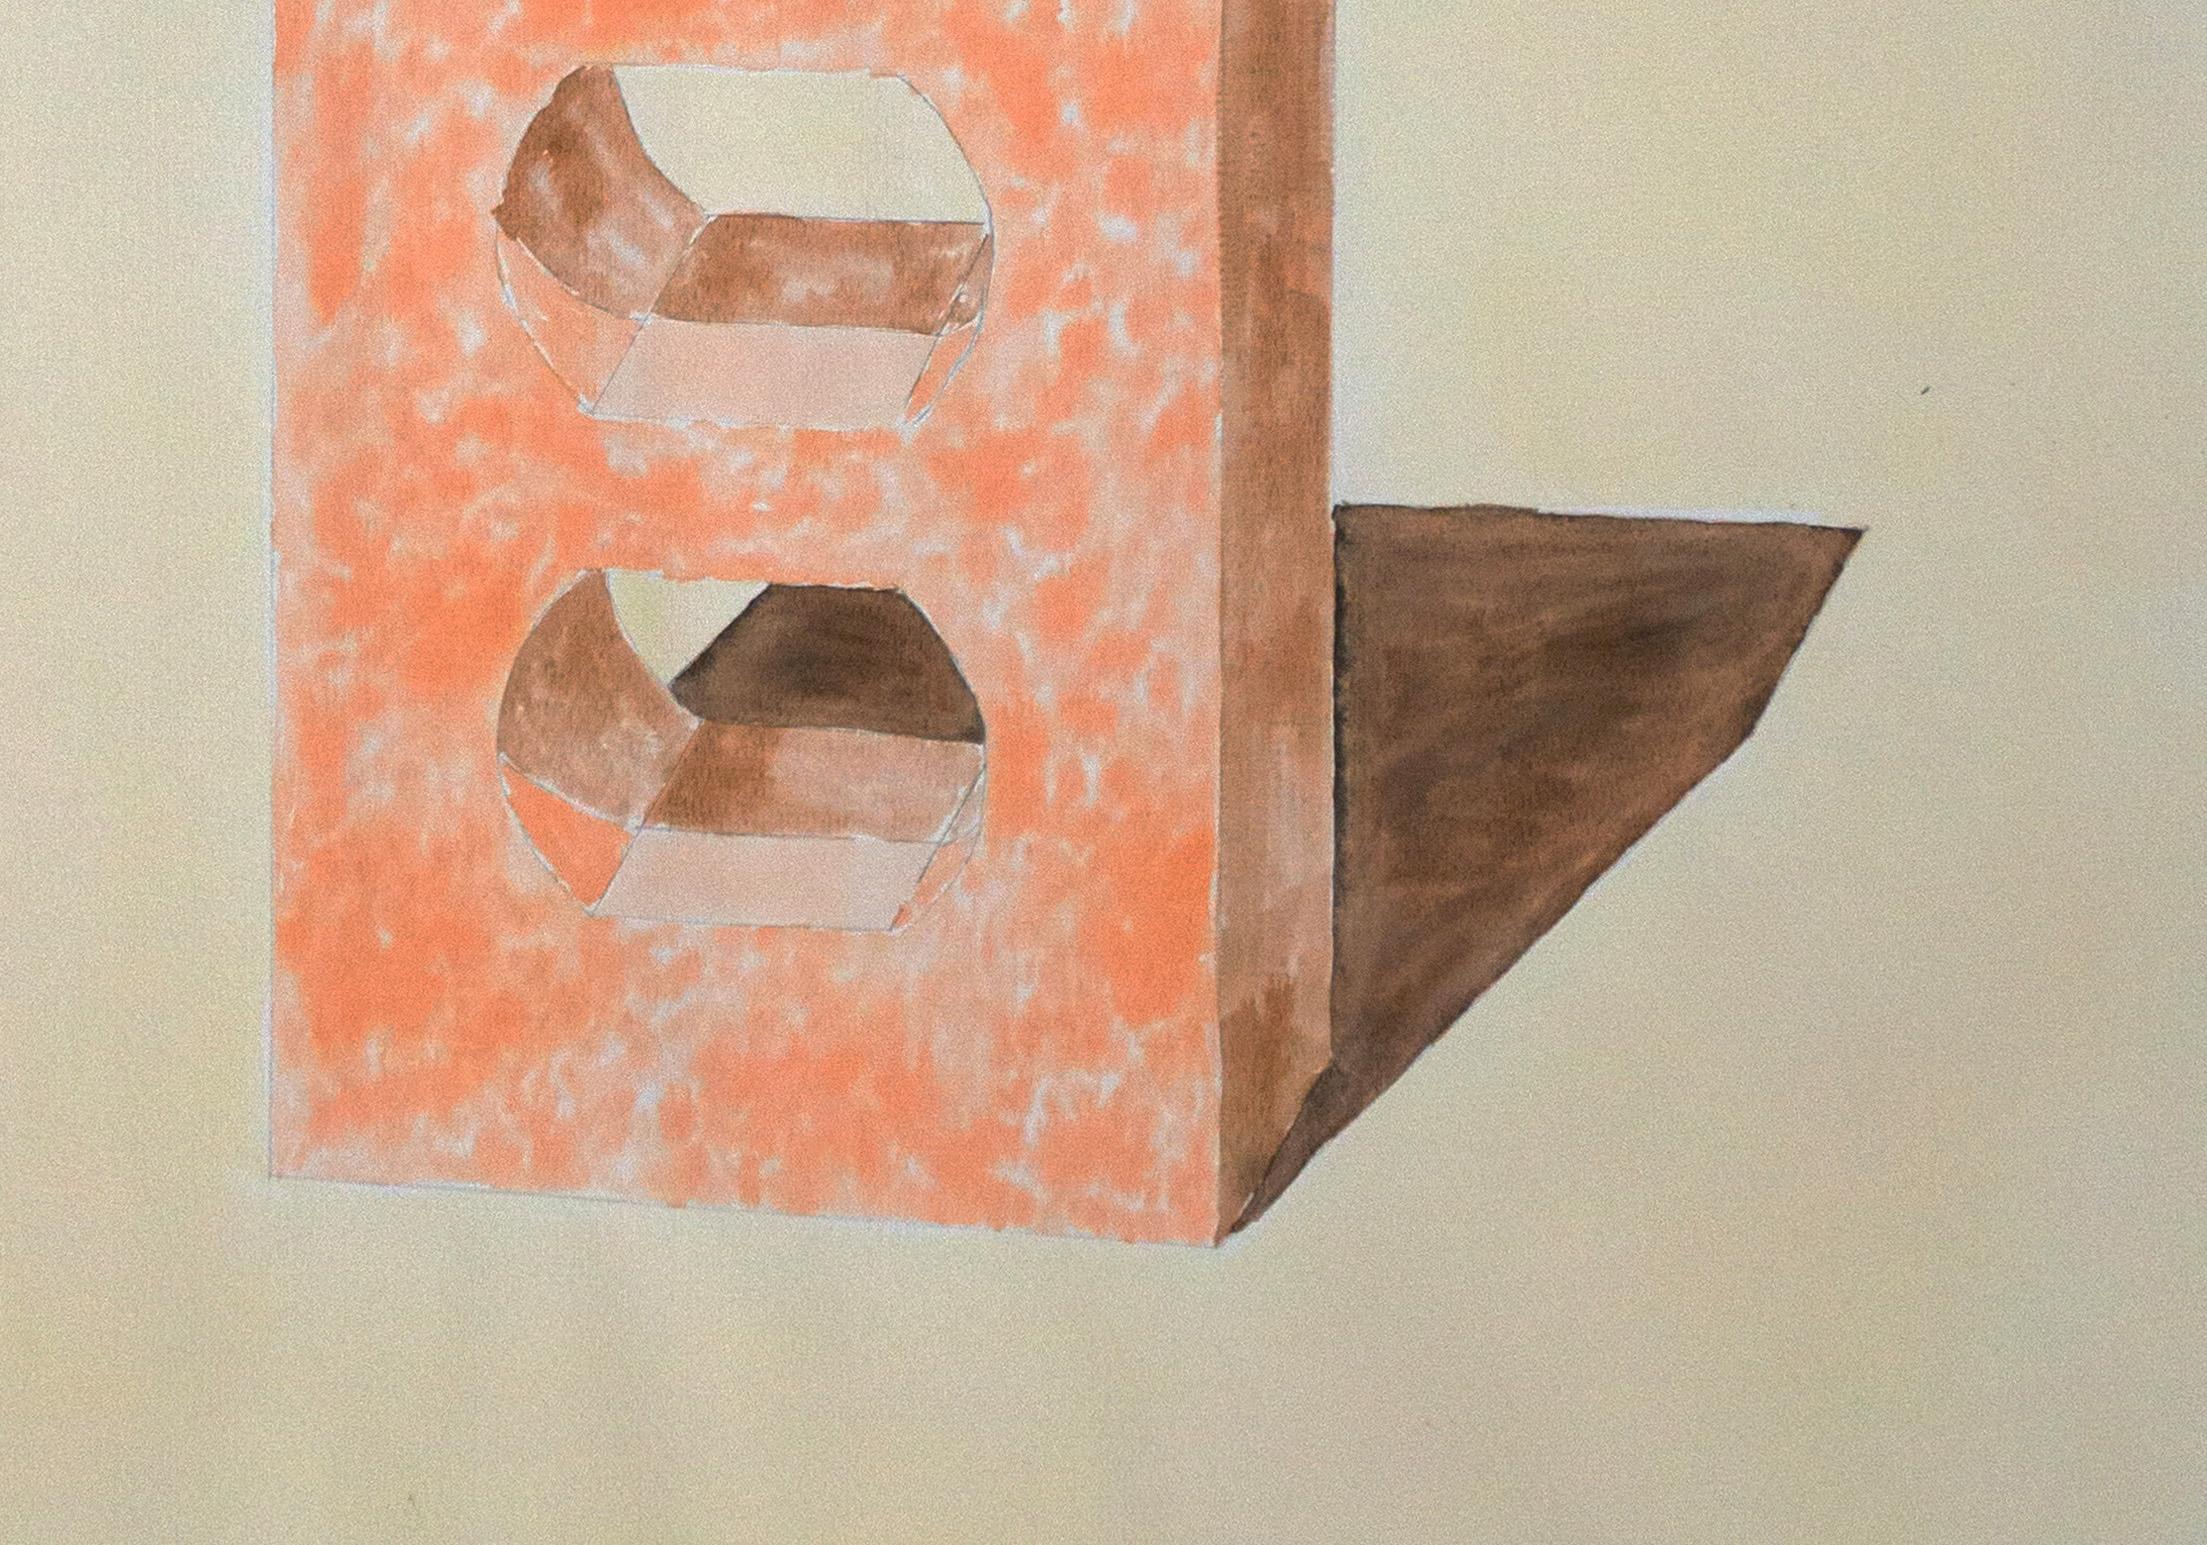 Yellow and Orange Brick, Hand Painted Watercolor on Paper, Ink Drawing, 100x70cm - Constructivist Art by Ryan Rivadeneyra